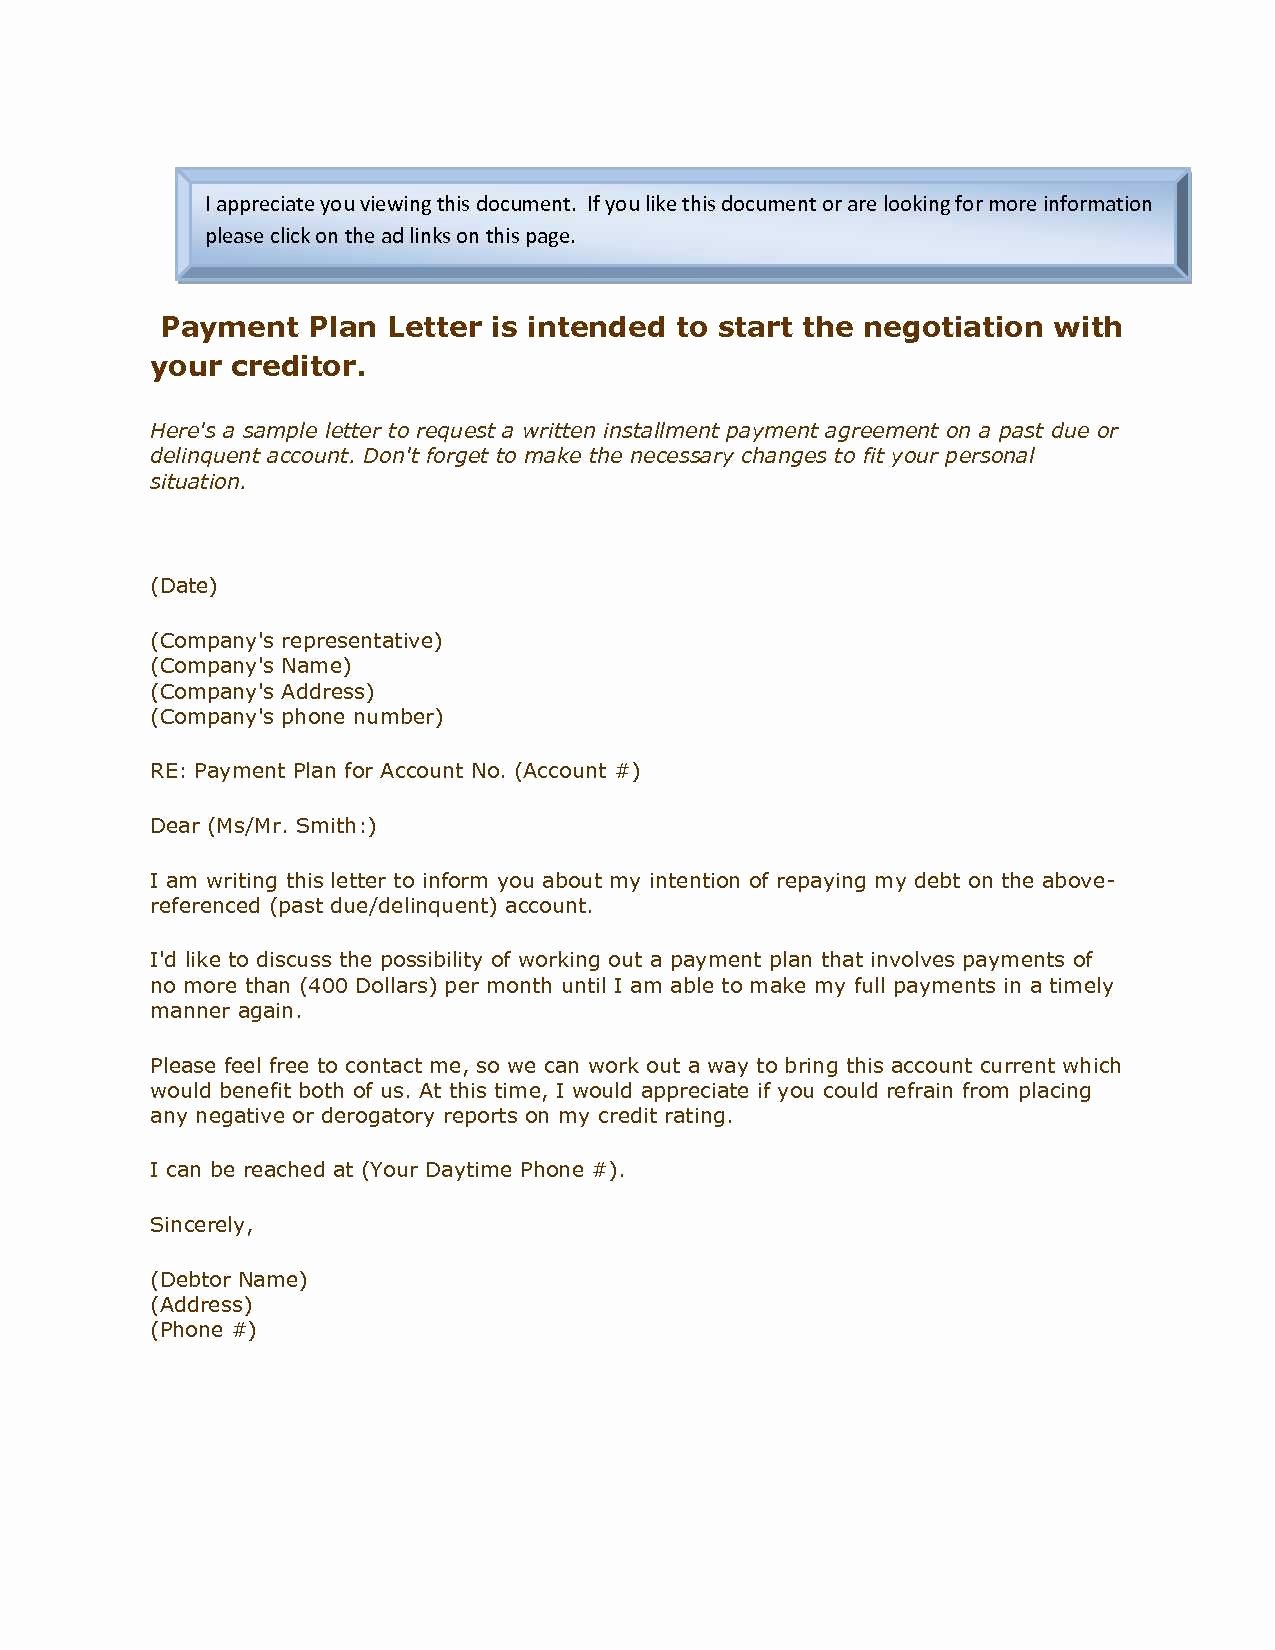 Payment Plan Letter Template Beautiful Letter Payment Arrangement with Example Plan Plus